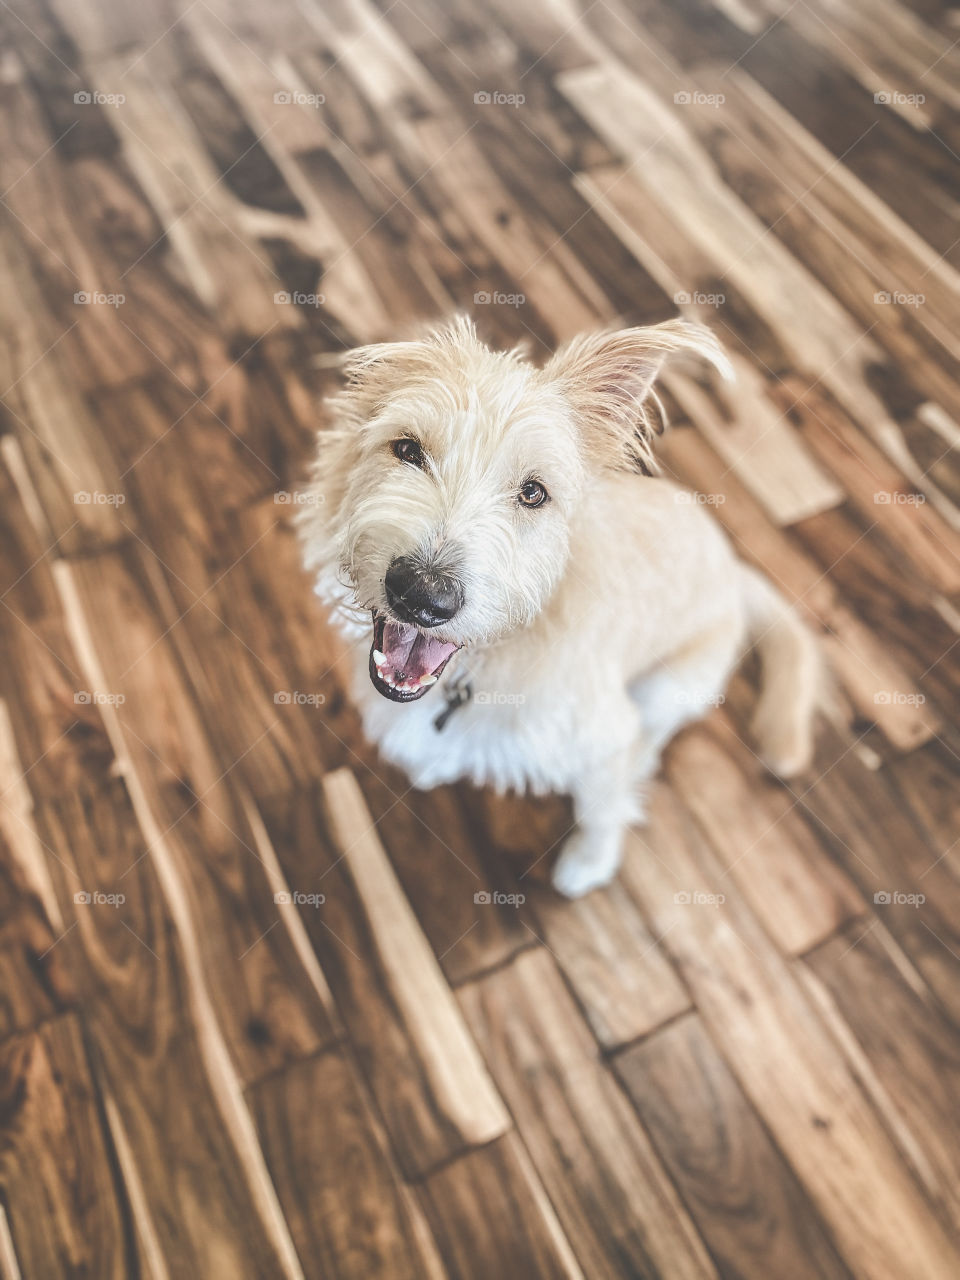 High angle view of a happy dog sitting on hardwood floor